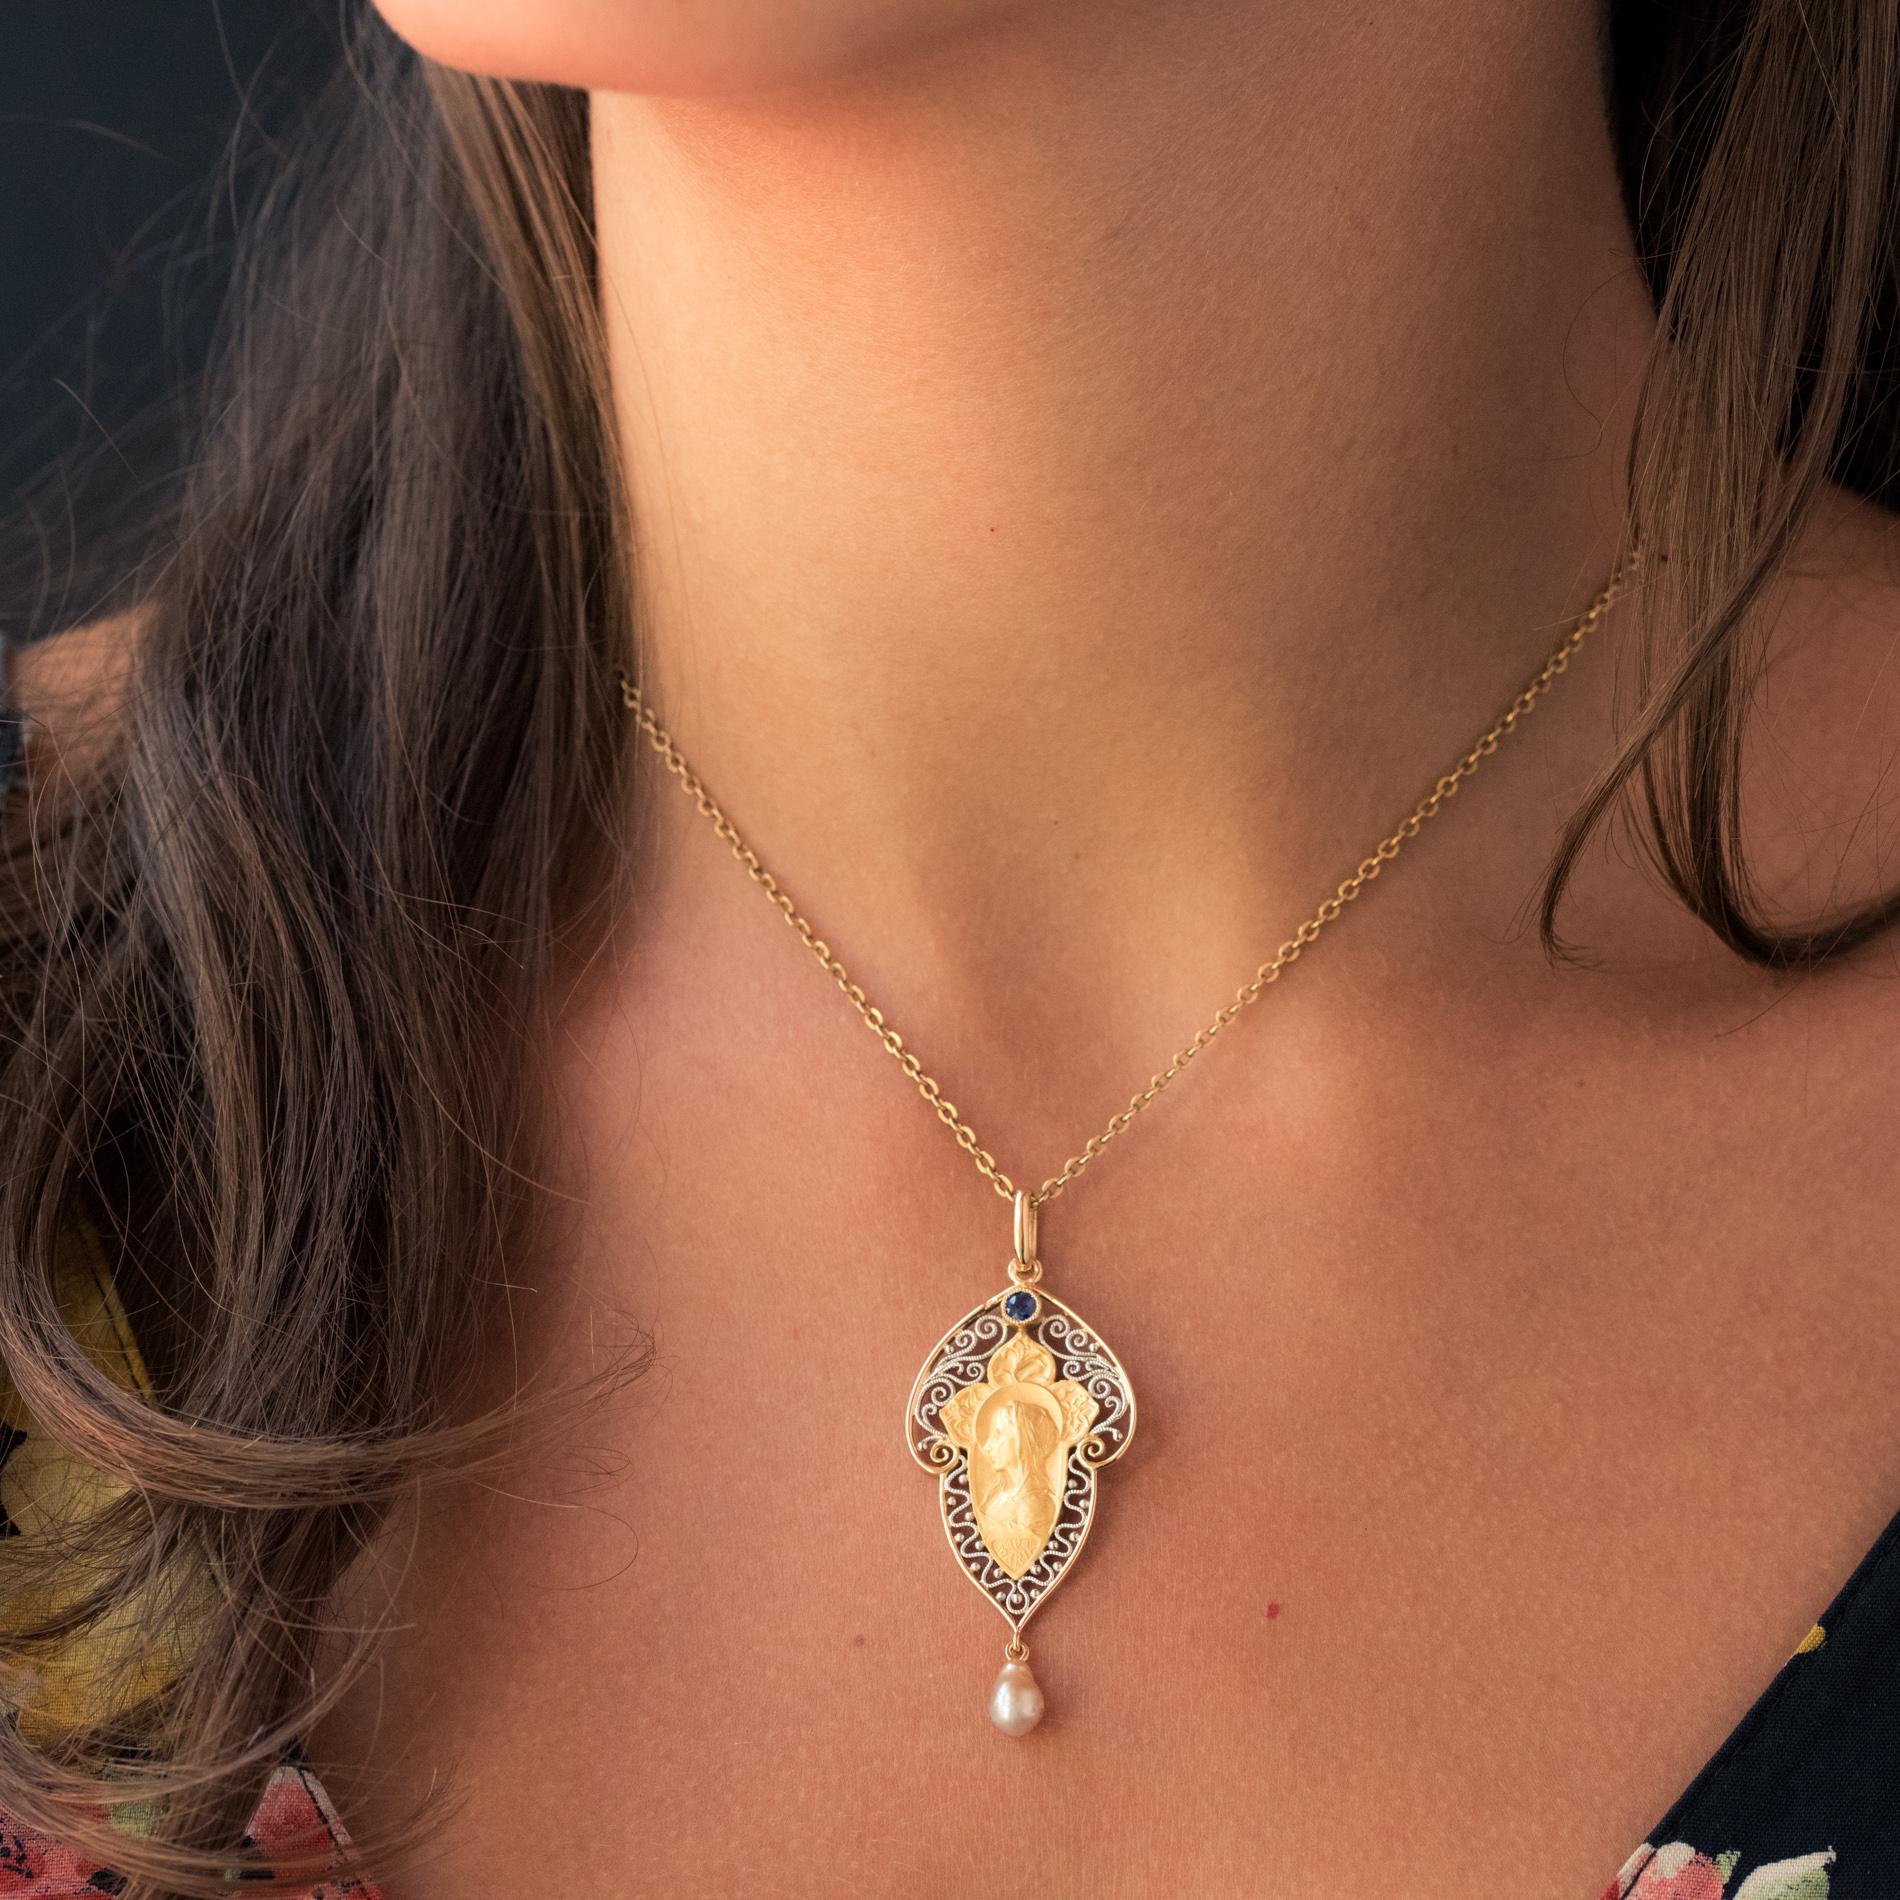 Pendant in 18 karat yellow and white gold eagle's head hallmark.
Superb antique jewel it is composed of an openwork decoration of arabesques in white gold filigree which hold in the center a medal in mat gold representing the haloed virgin. 